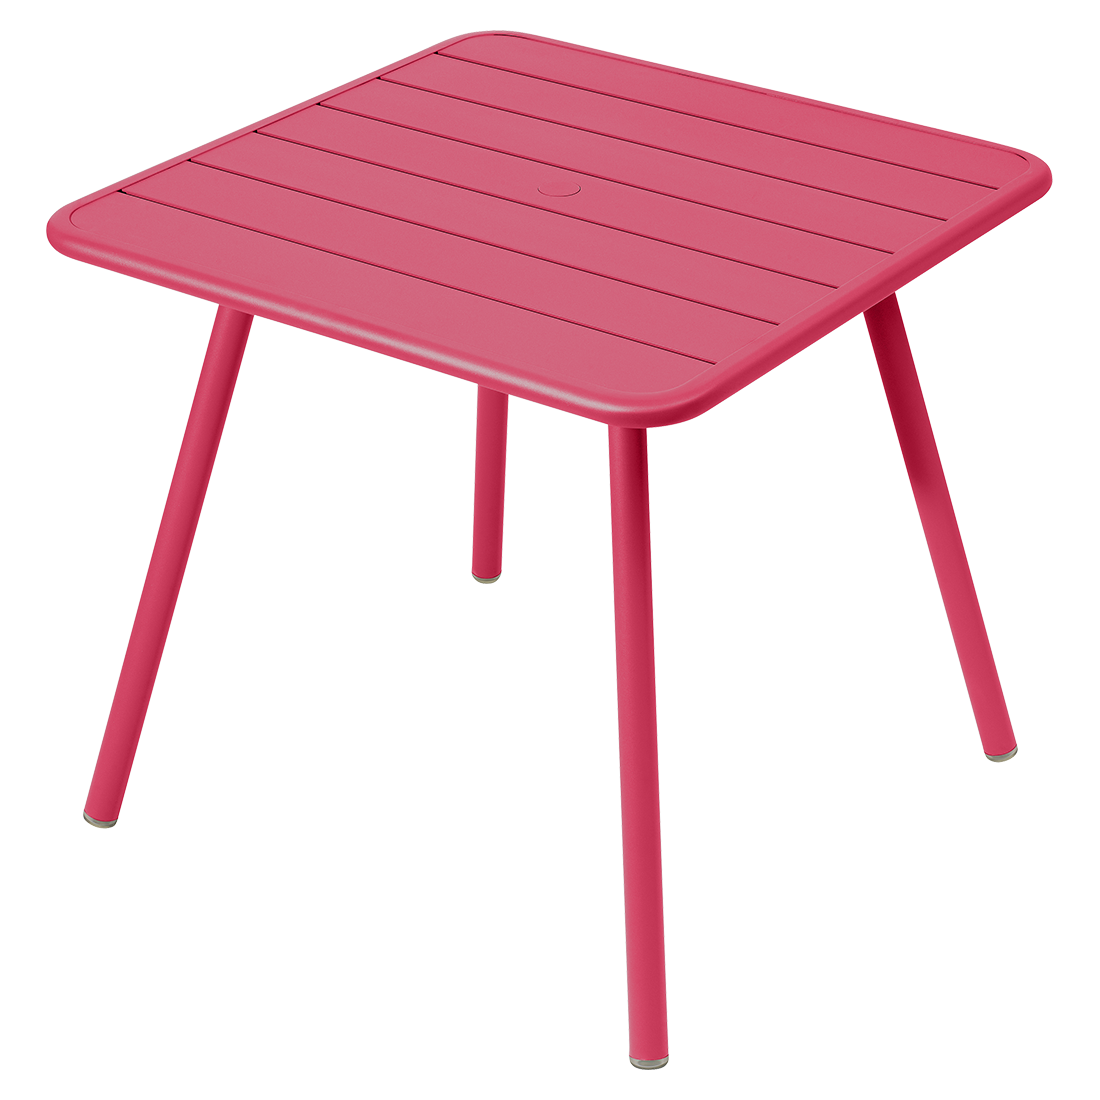 table de jardin, table metal, table 4 places, table rose, table fermob